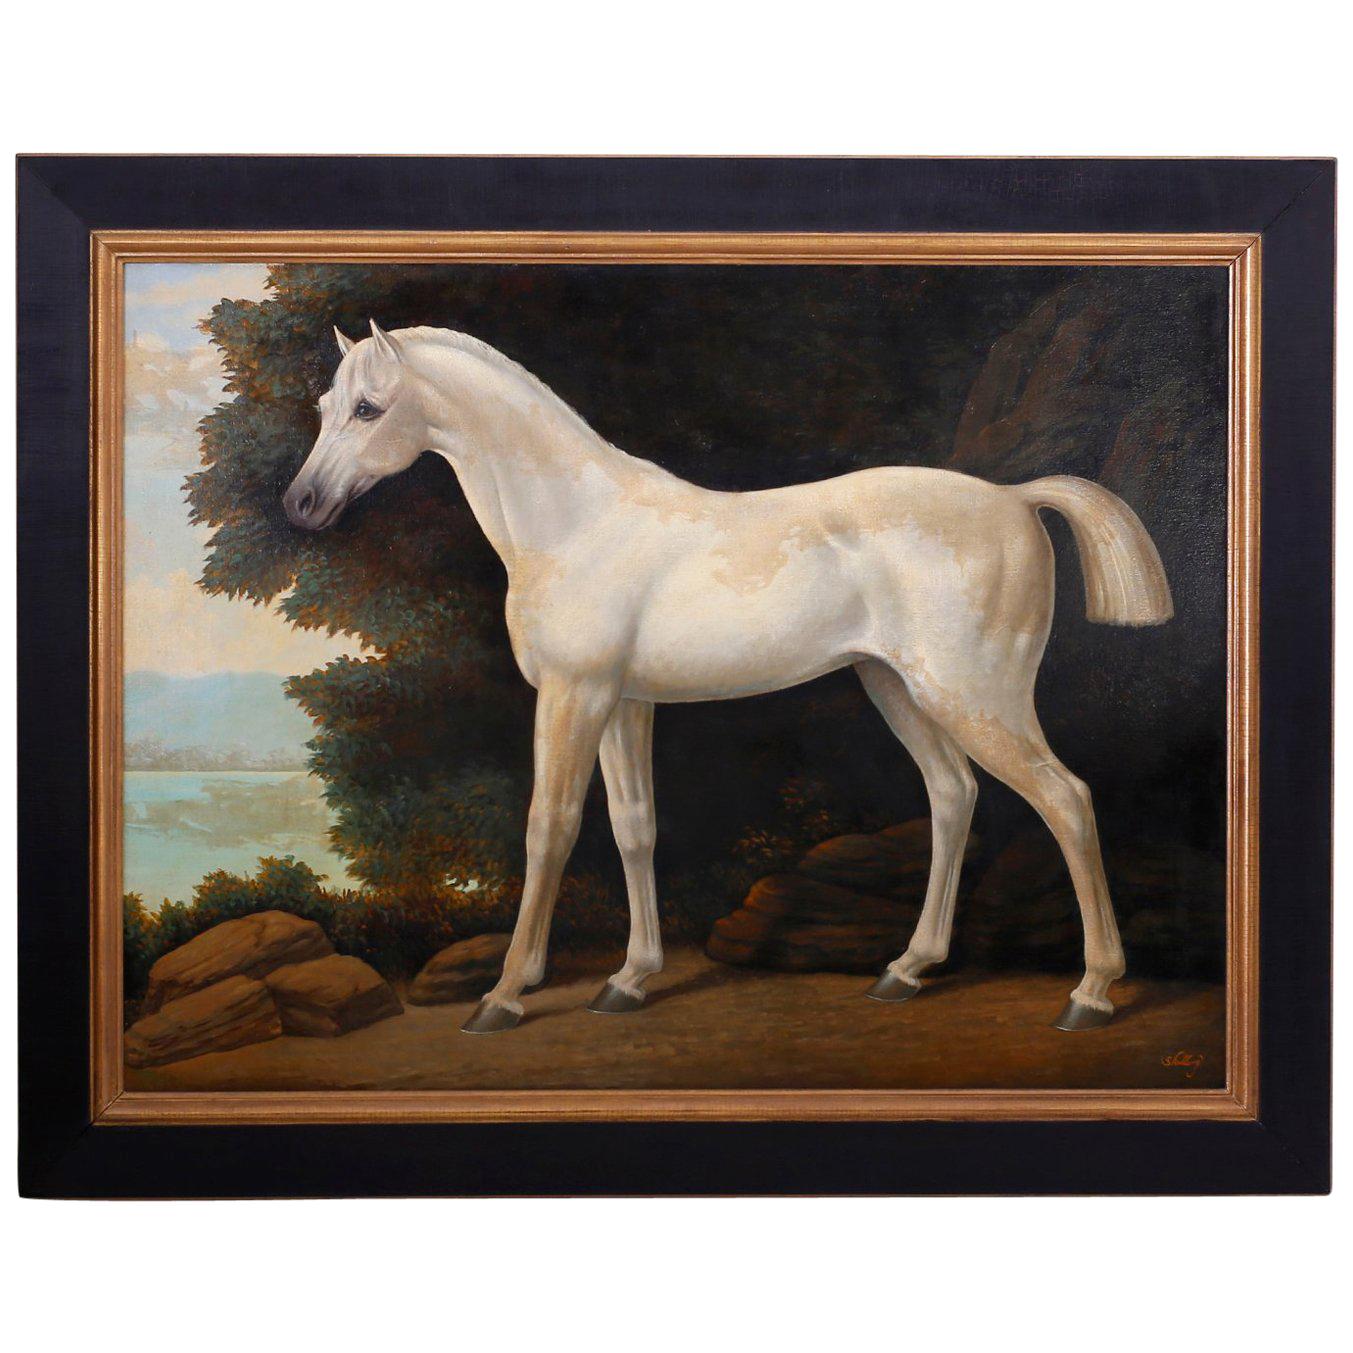 William Skilling Oil Painting on Canvas of a Show Horse